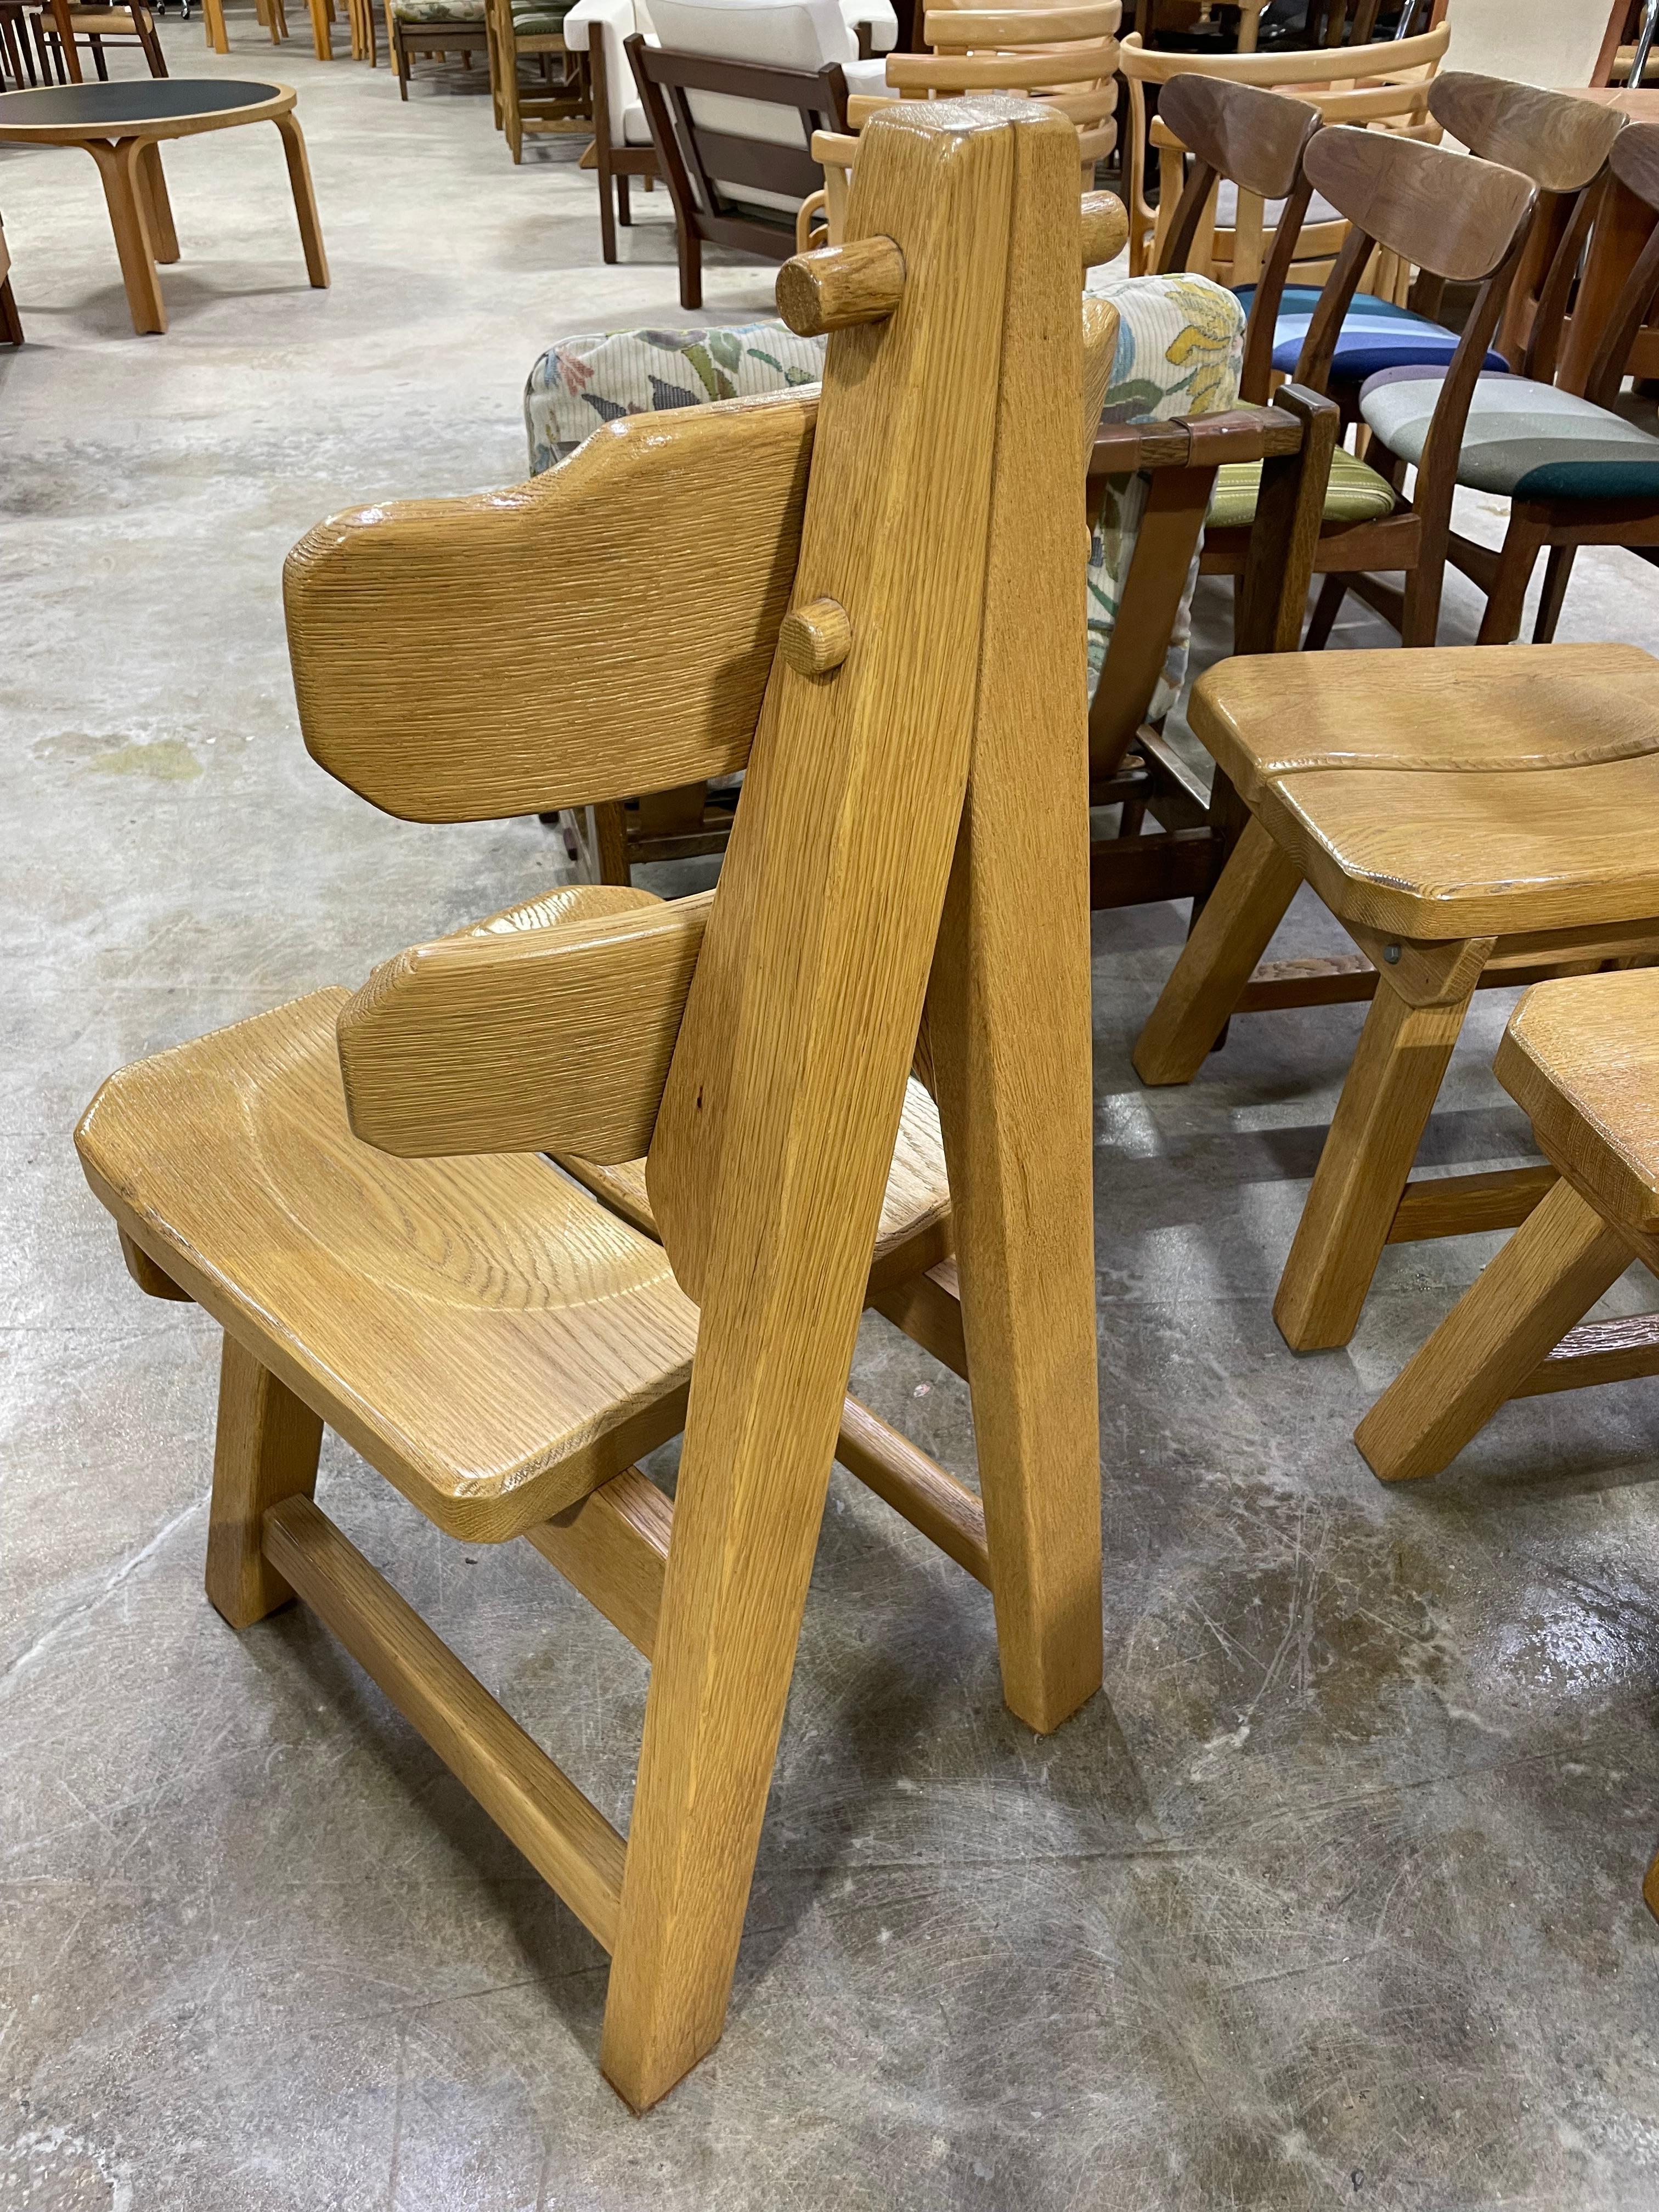 Rare set of oak dining chairs produced in Spain. Brutalist geometrical design. Super sturdy construction. Exposed joints.